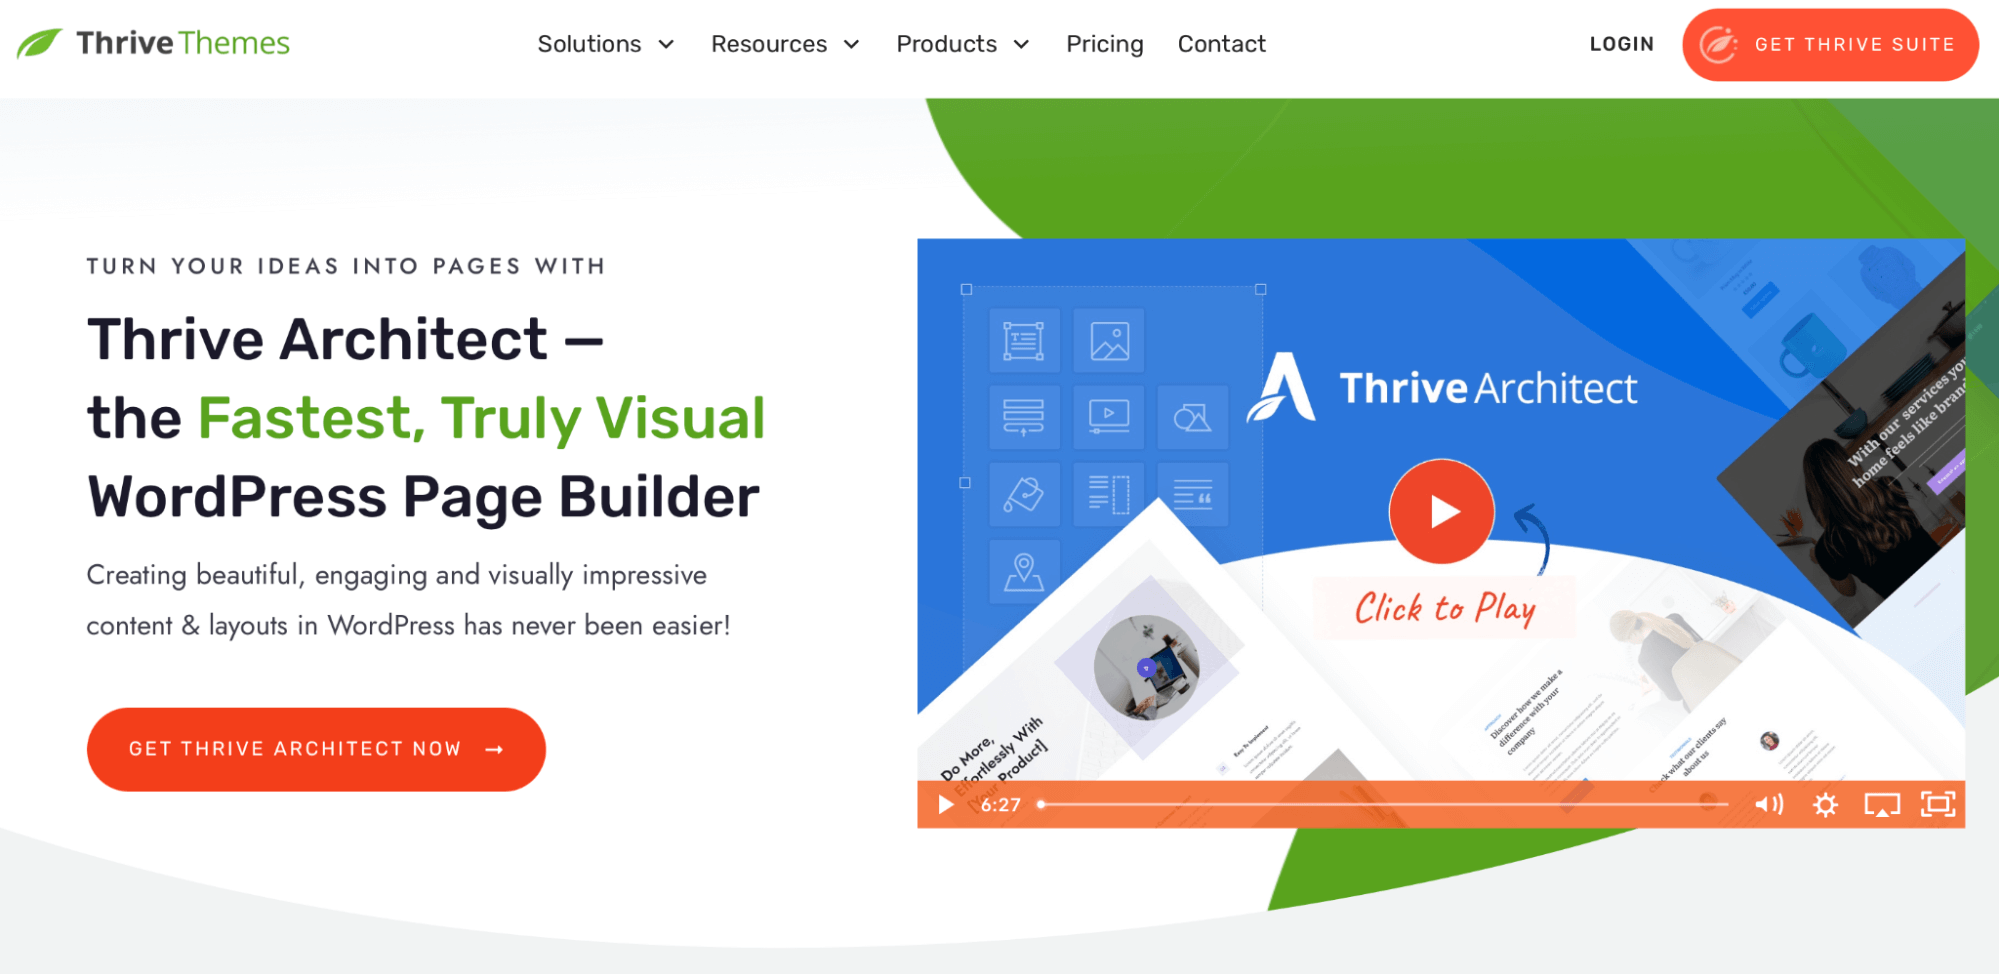 Thrive Architect landing page builder